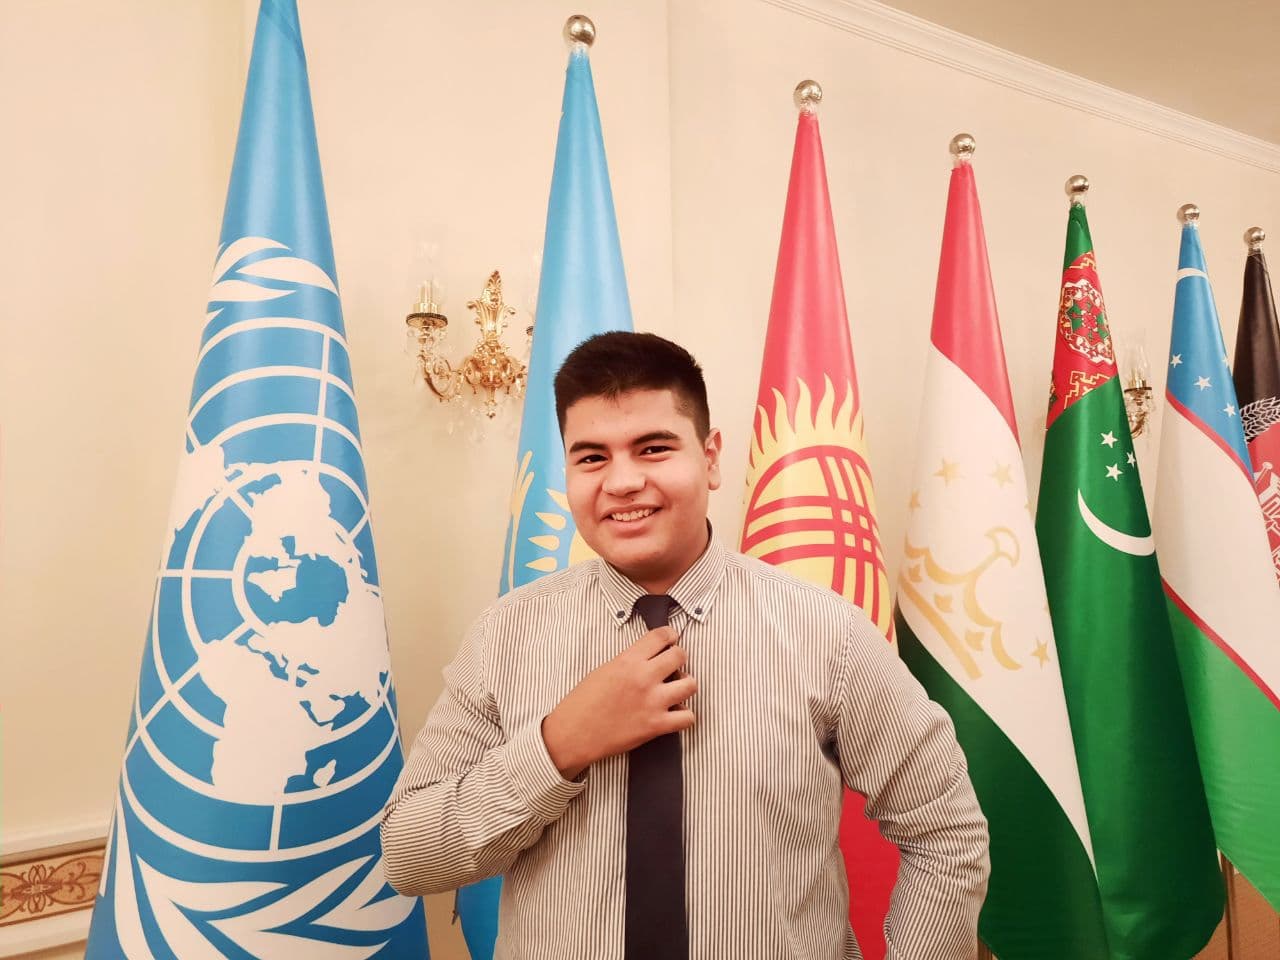 A man stands in front of flags. He is wearing a dress shirt and tie and smiling. 